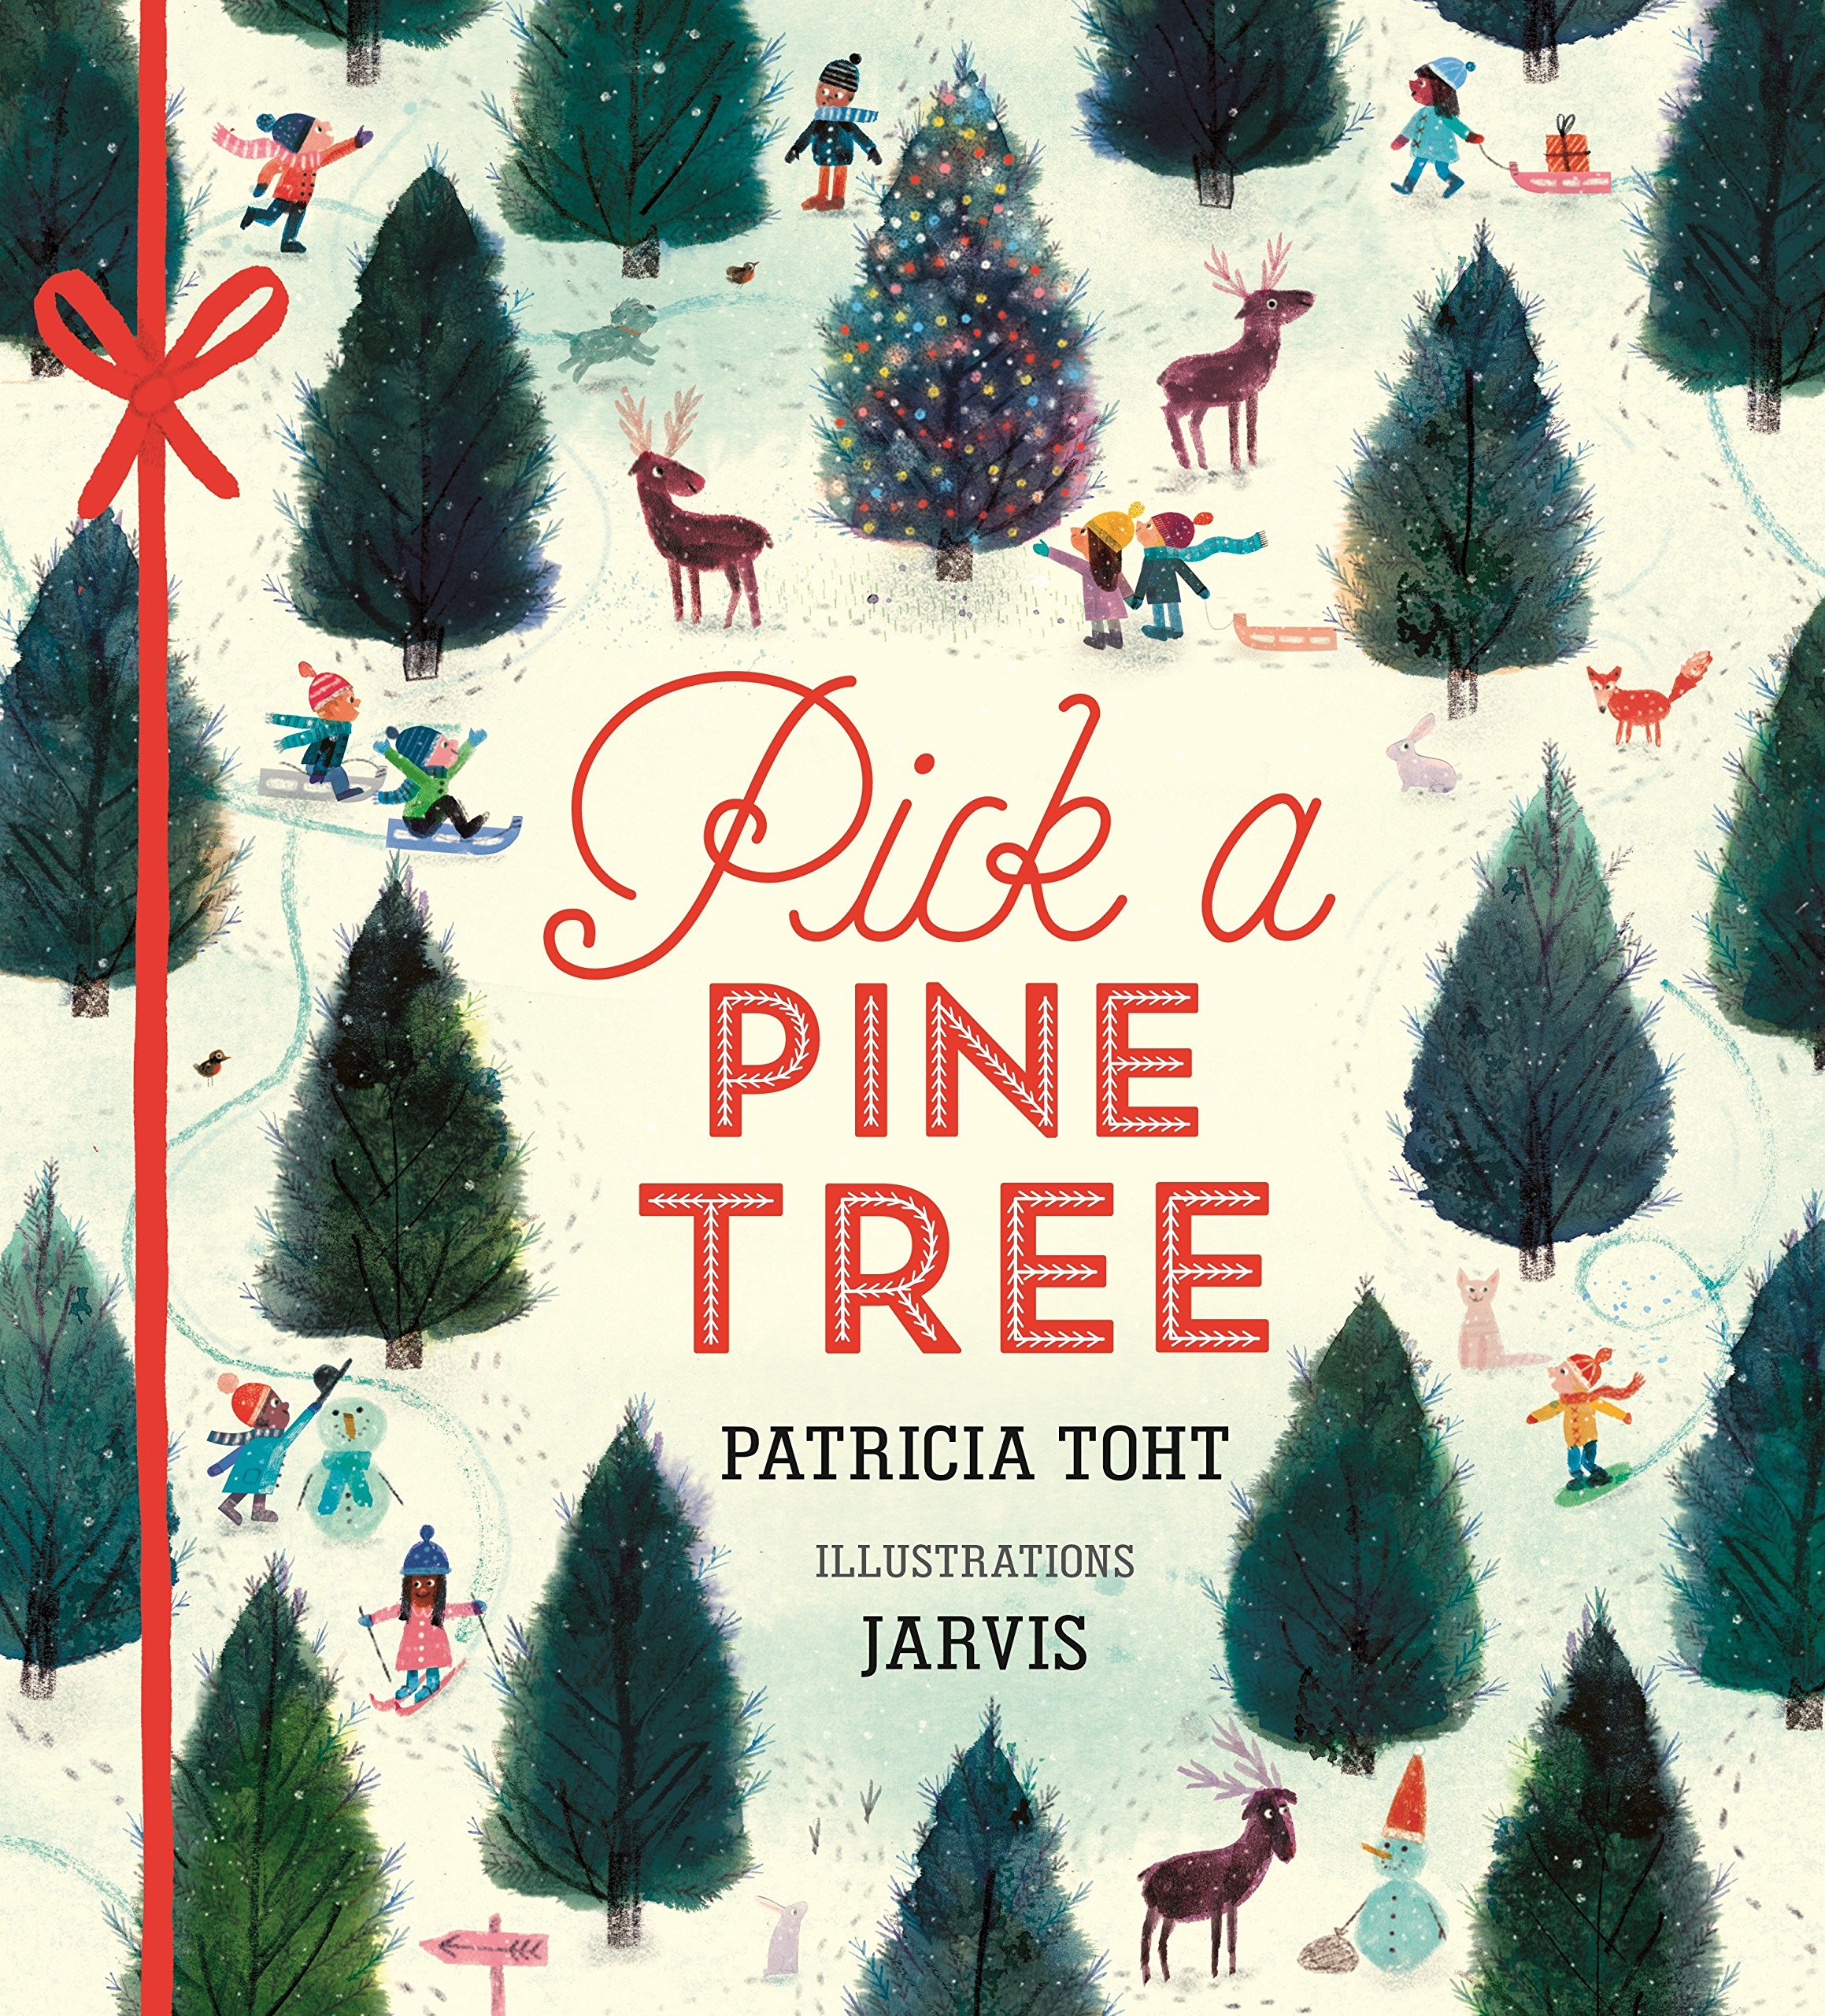 using Pick A Pine Tree in speech therapy